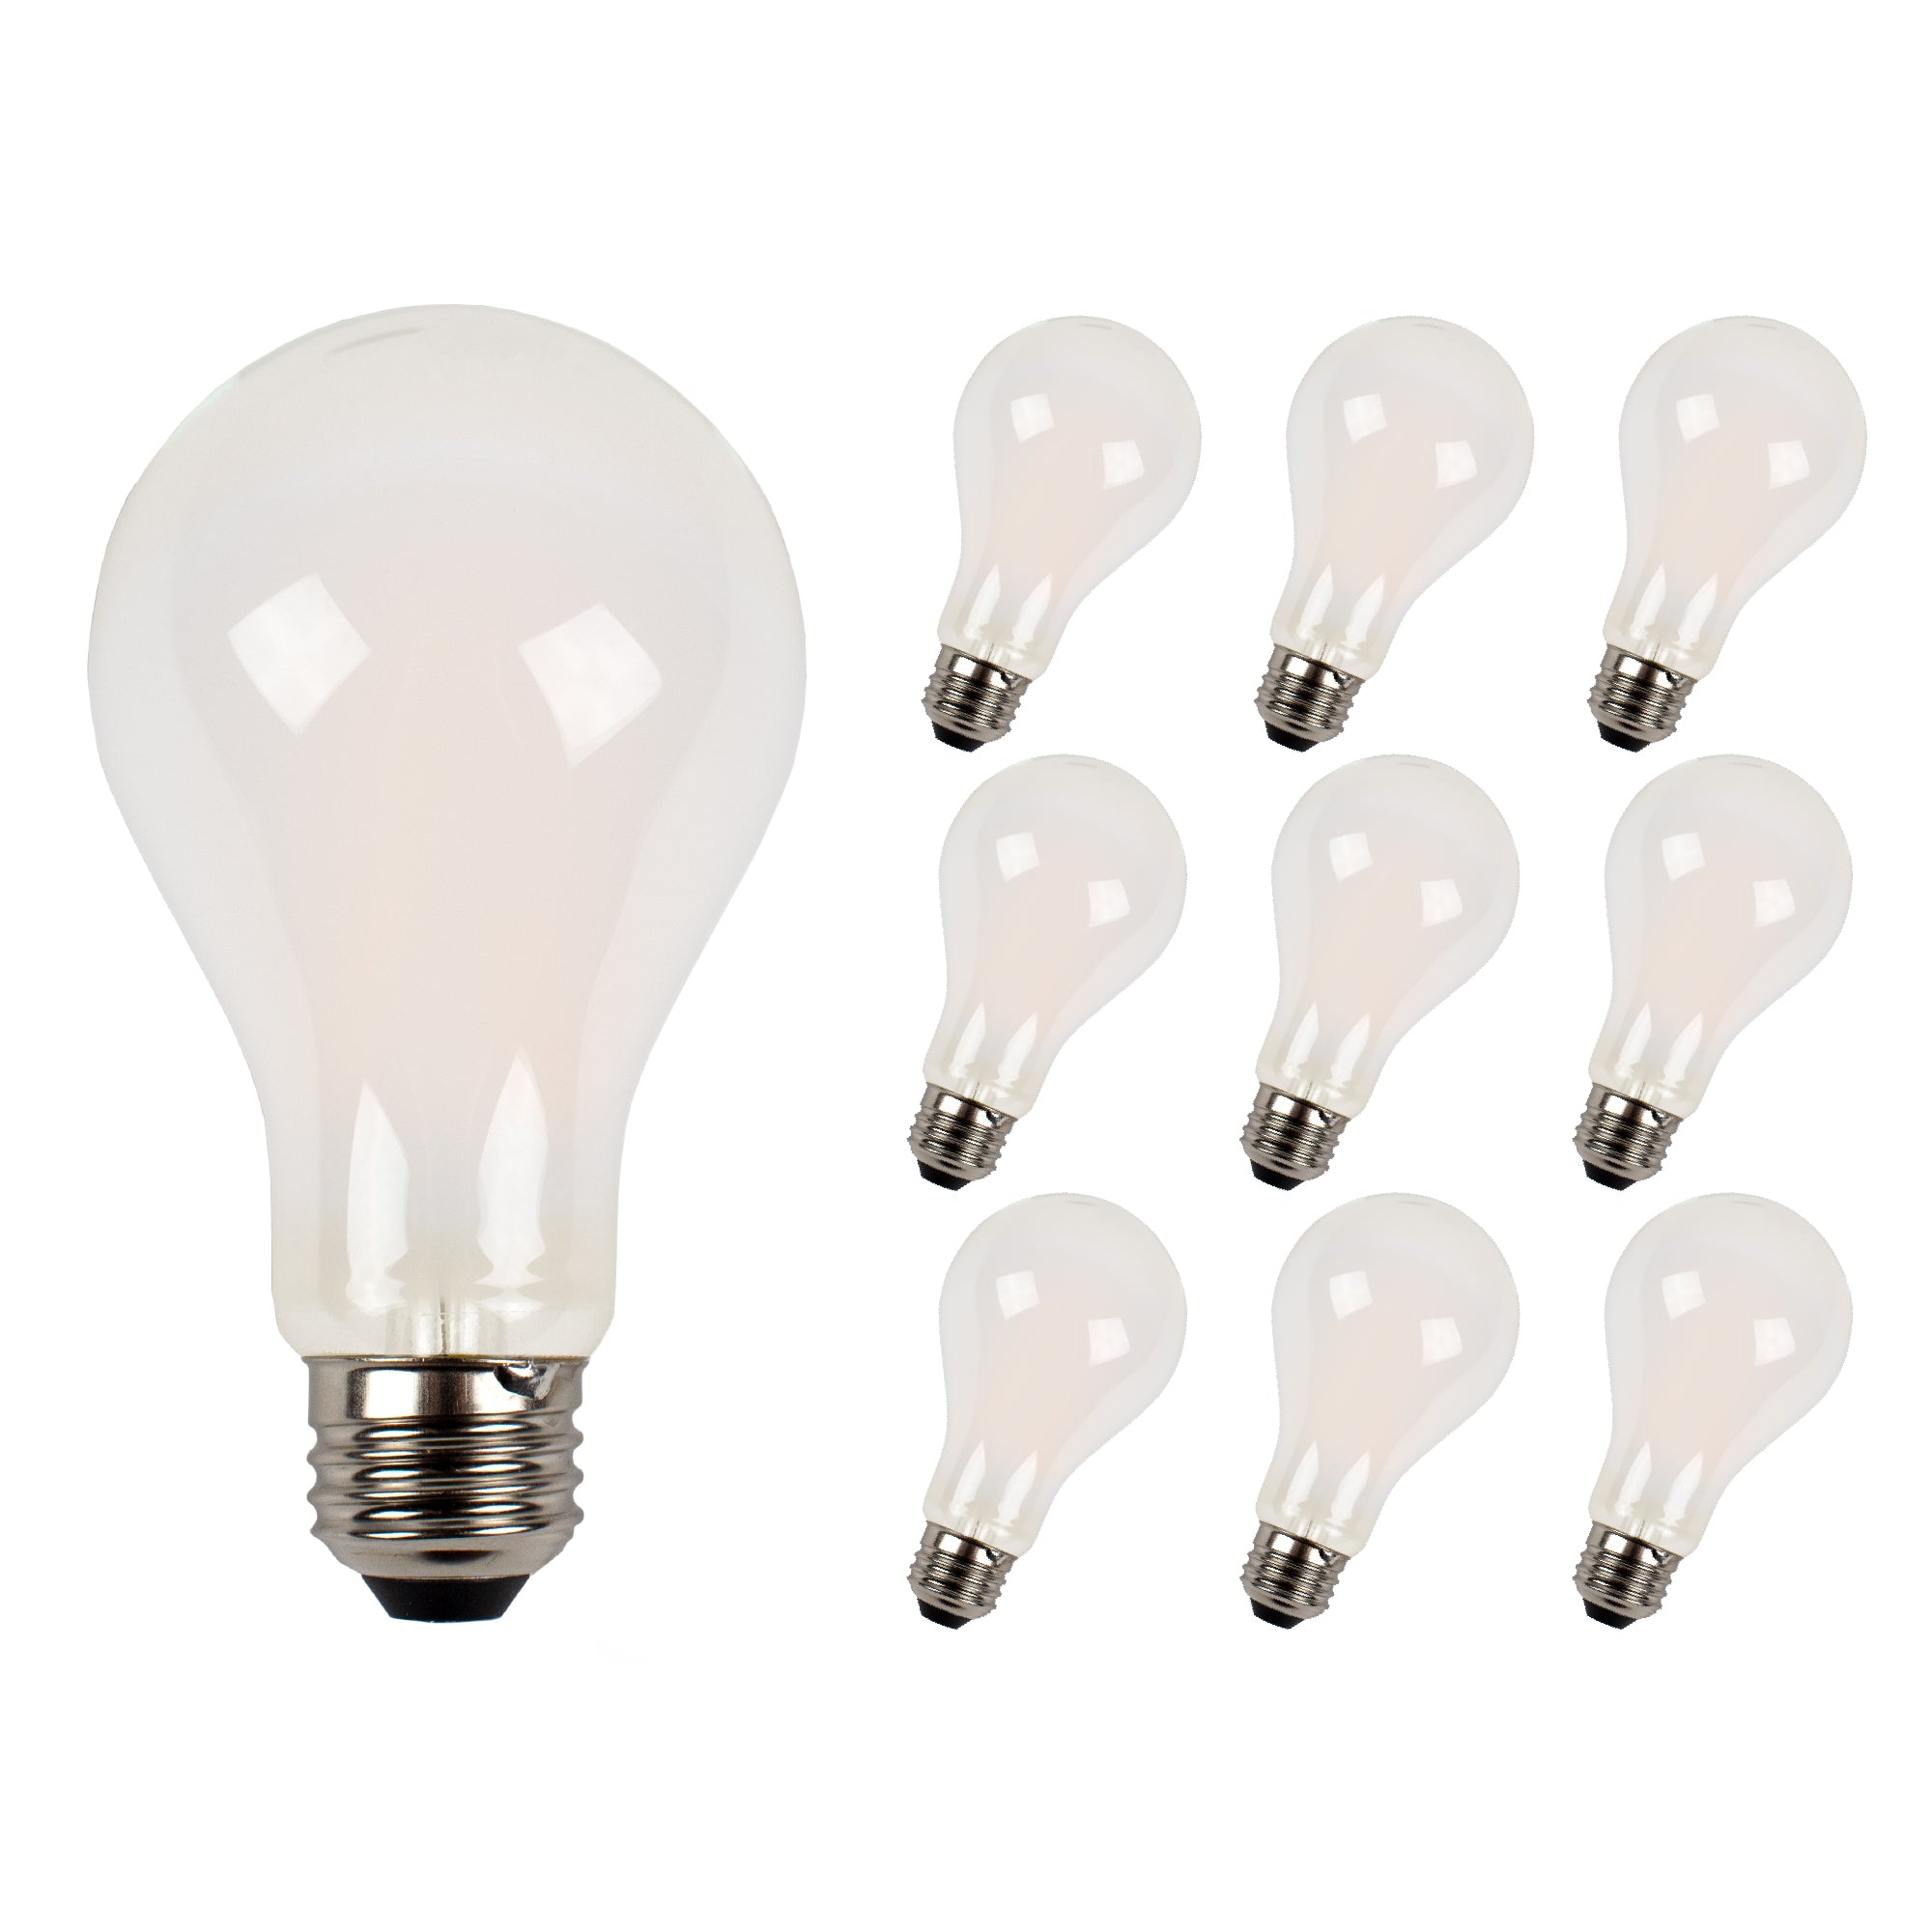 10 pack of a21 bulbs on white background